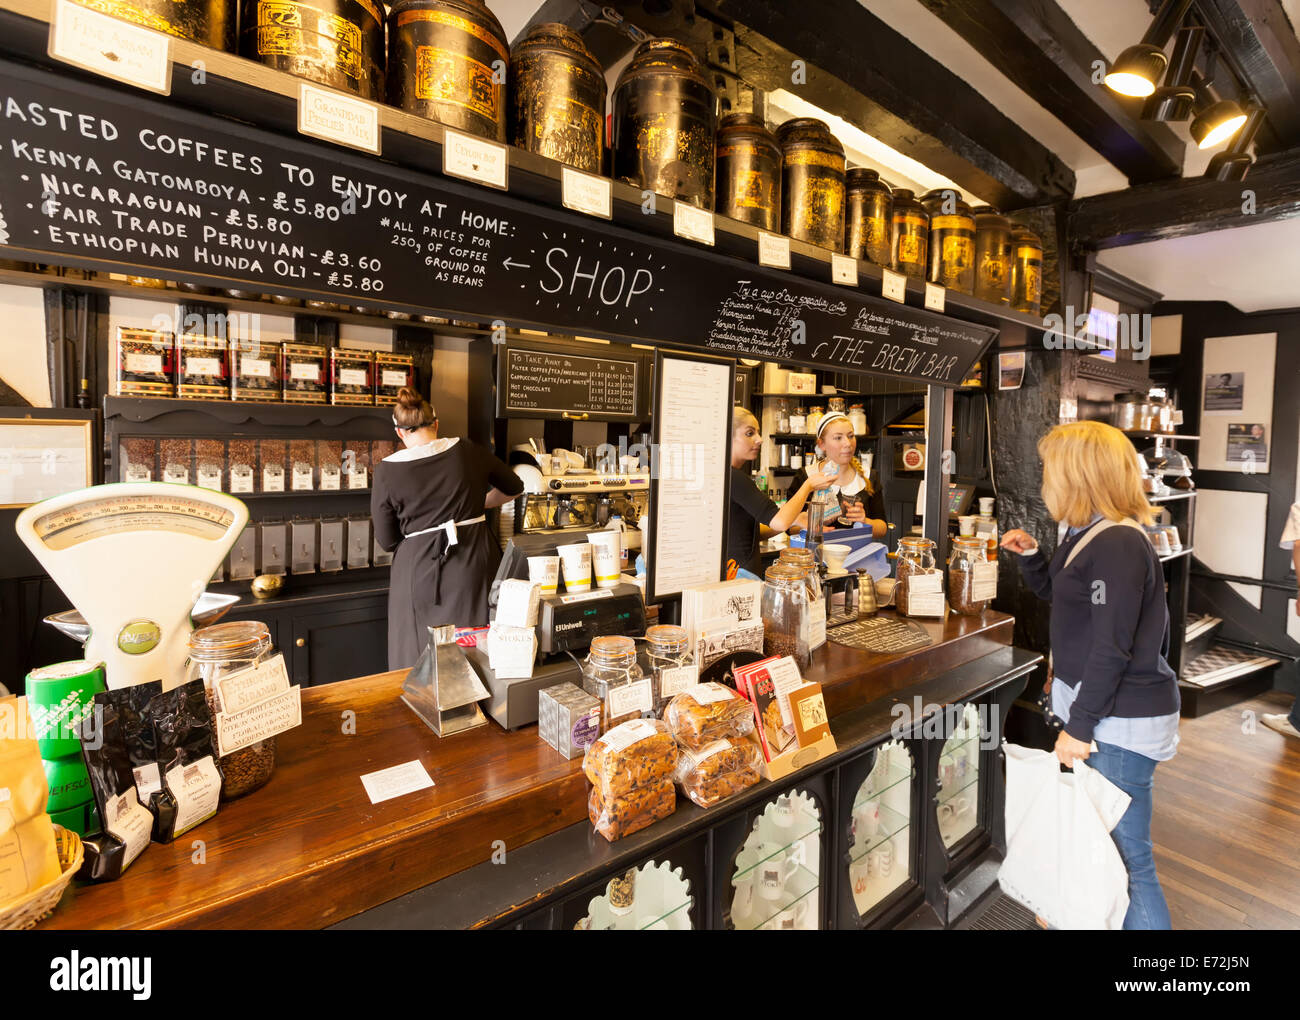 A woman buying tea at the counter, Stokes High Bridge cafe interior, Lincoln city, Lincolnshire UK Stock Photo